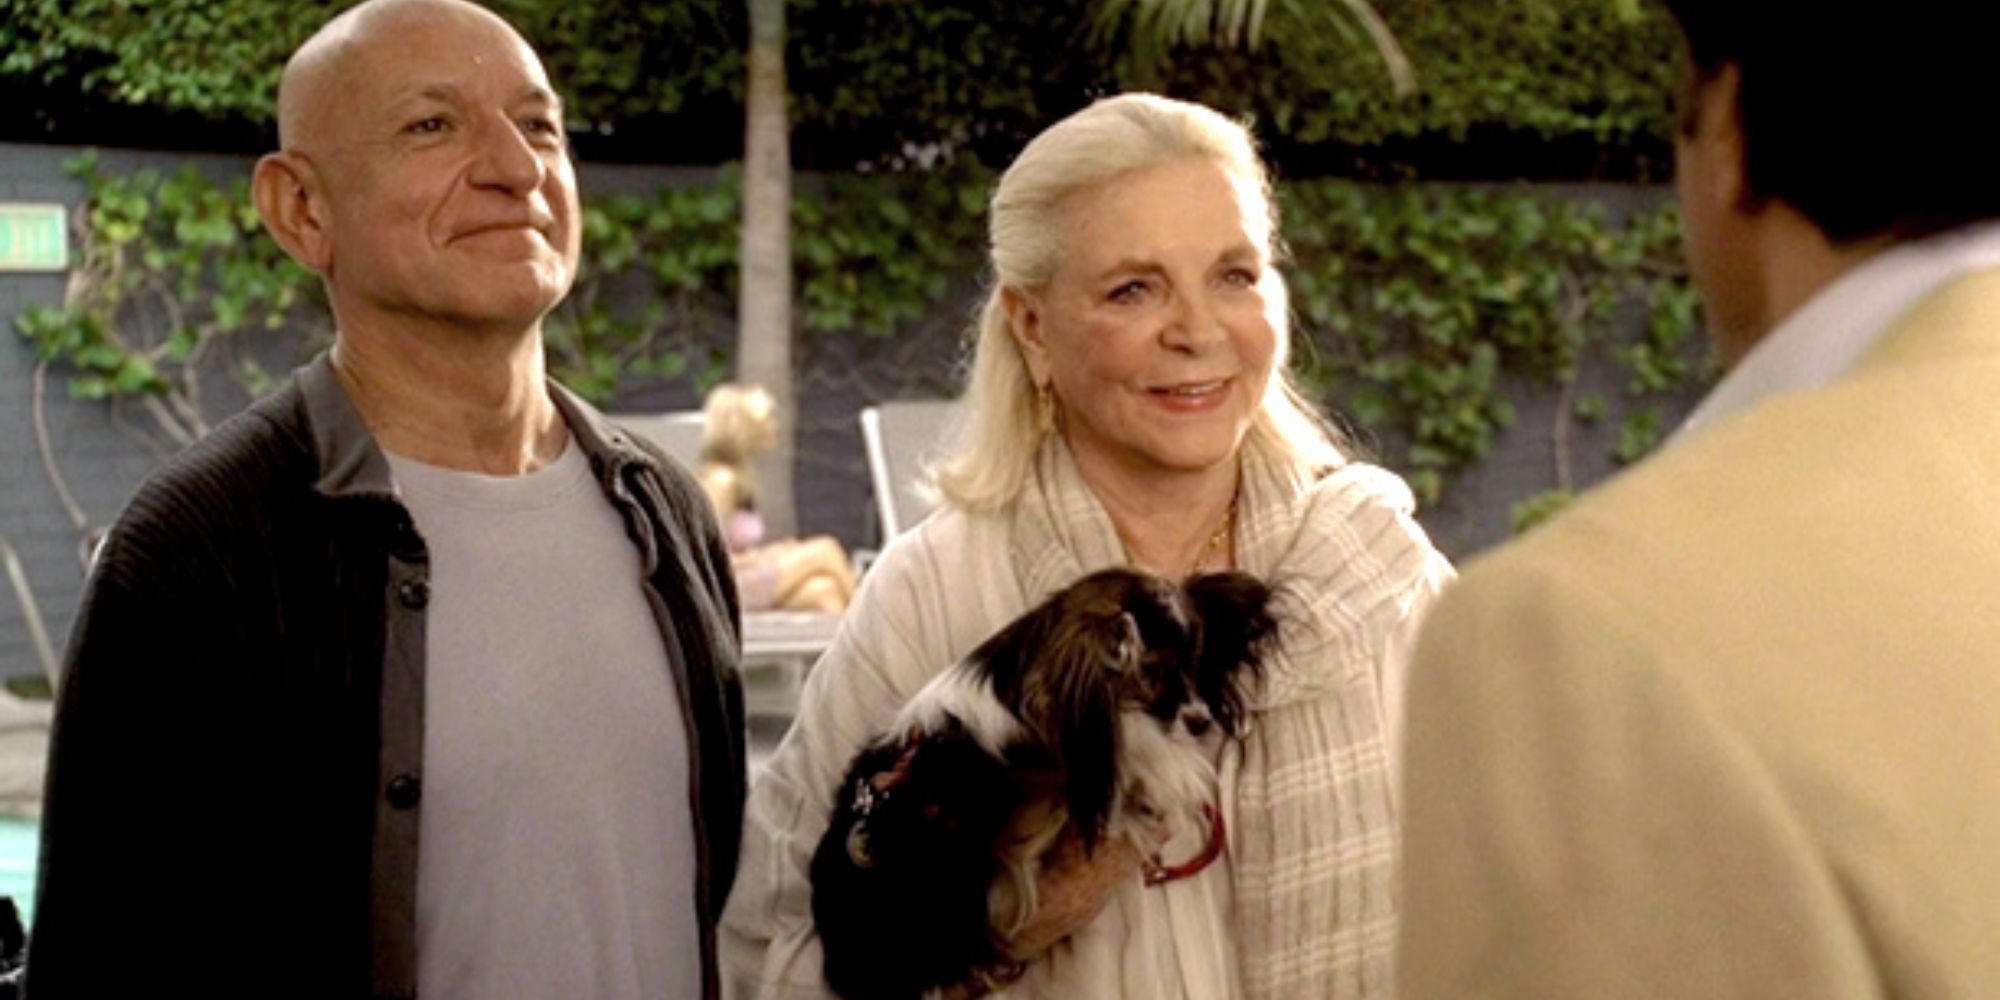 Ben Kingsley standing next to Lauren Bacall who is holding a dog both looking at someone who has their back to the camera in The Sopranos